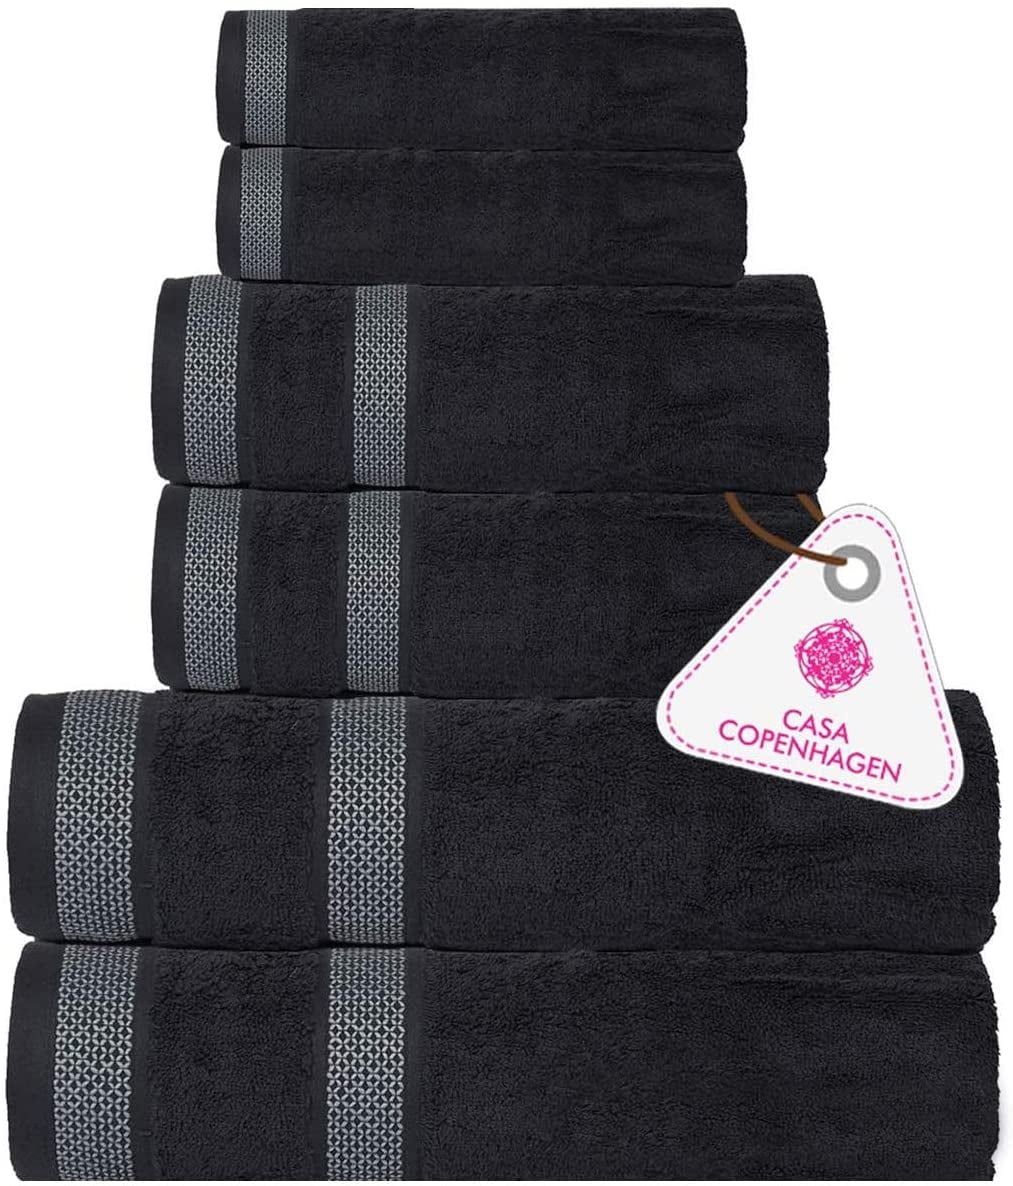 3 PACK KITCHEN TOWELS ASSORTED COLORS 100% COTTON 16" X 24" BRAND NEW 4443 !! 